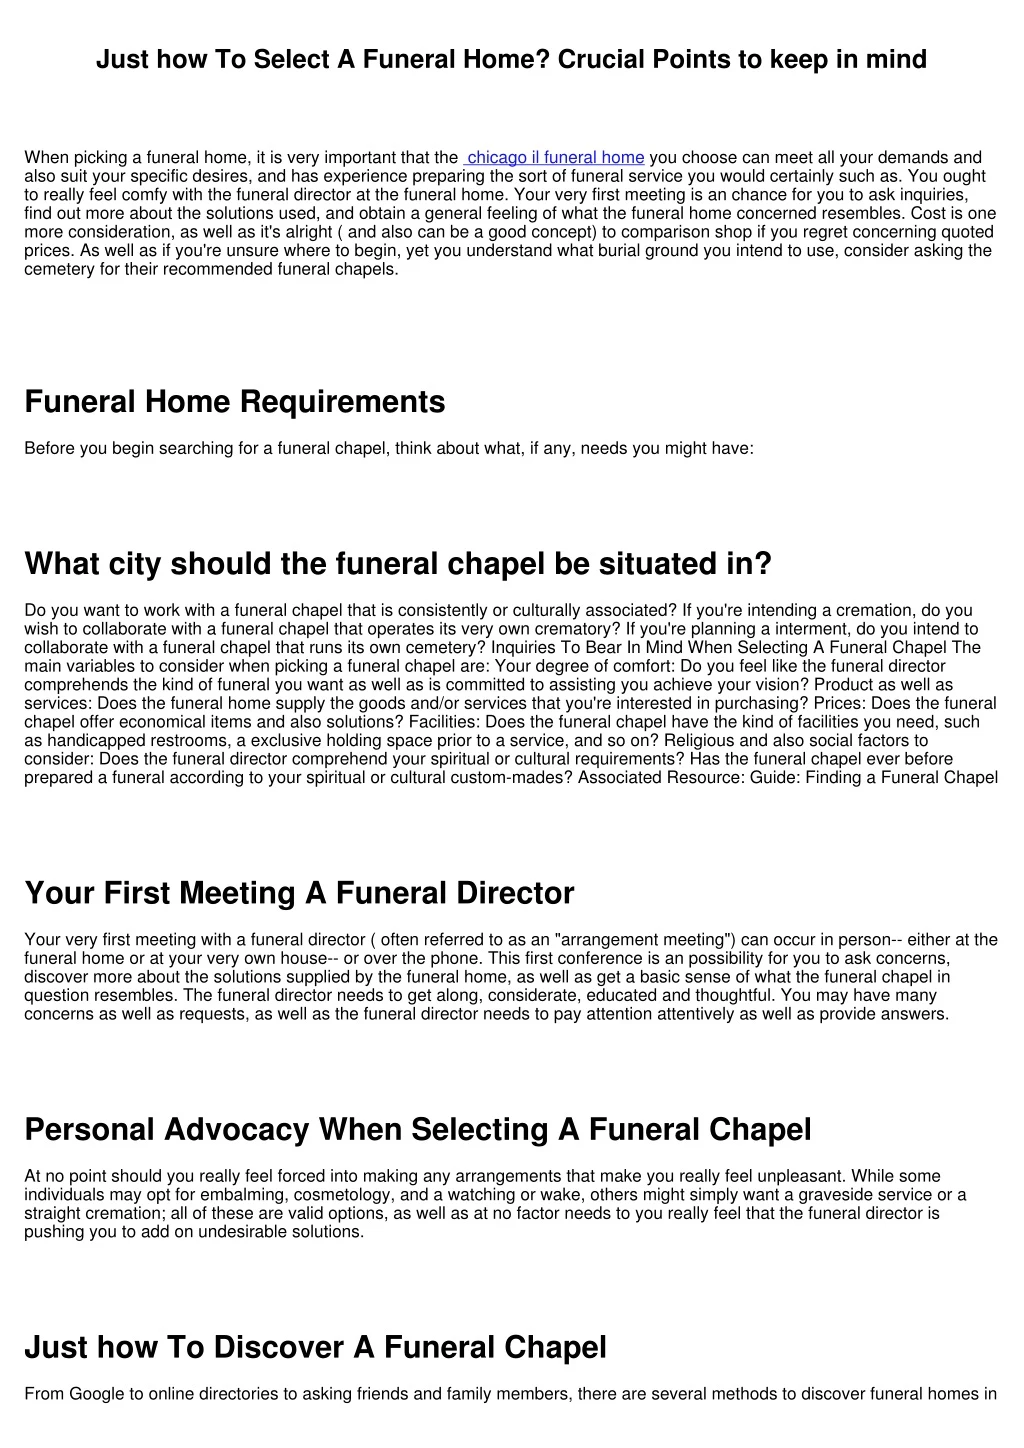 just how to select a funeral home crucial points